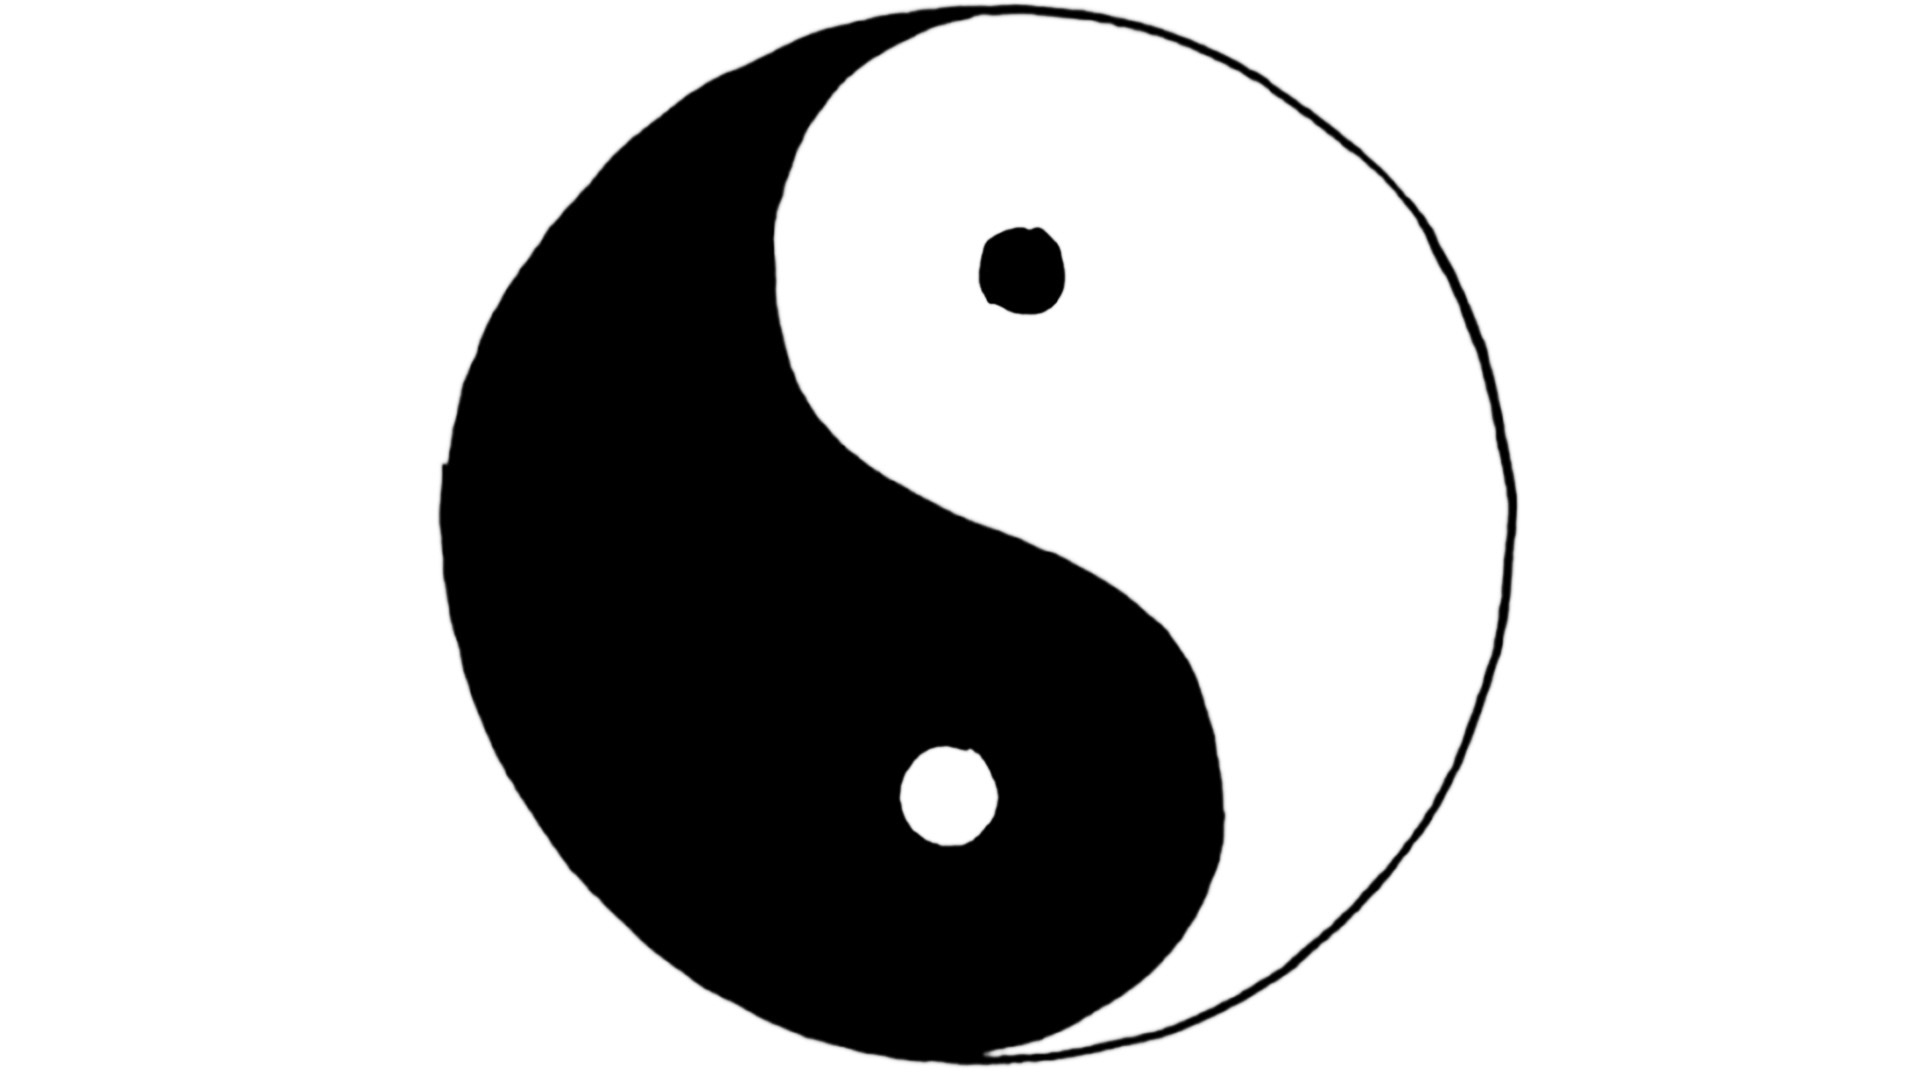 The hidden meanings of yin and yang - John Bellaimey - YouTube